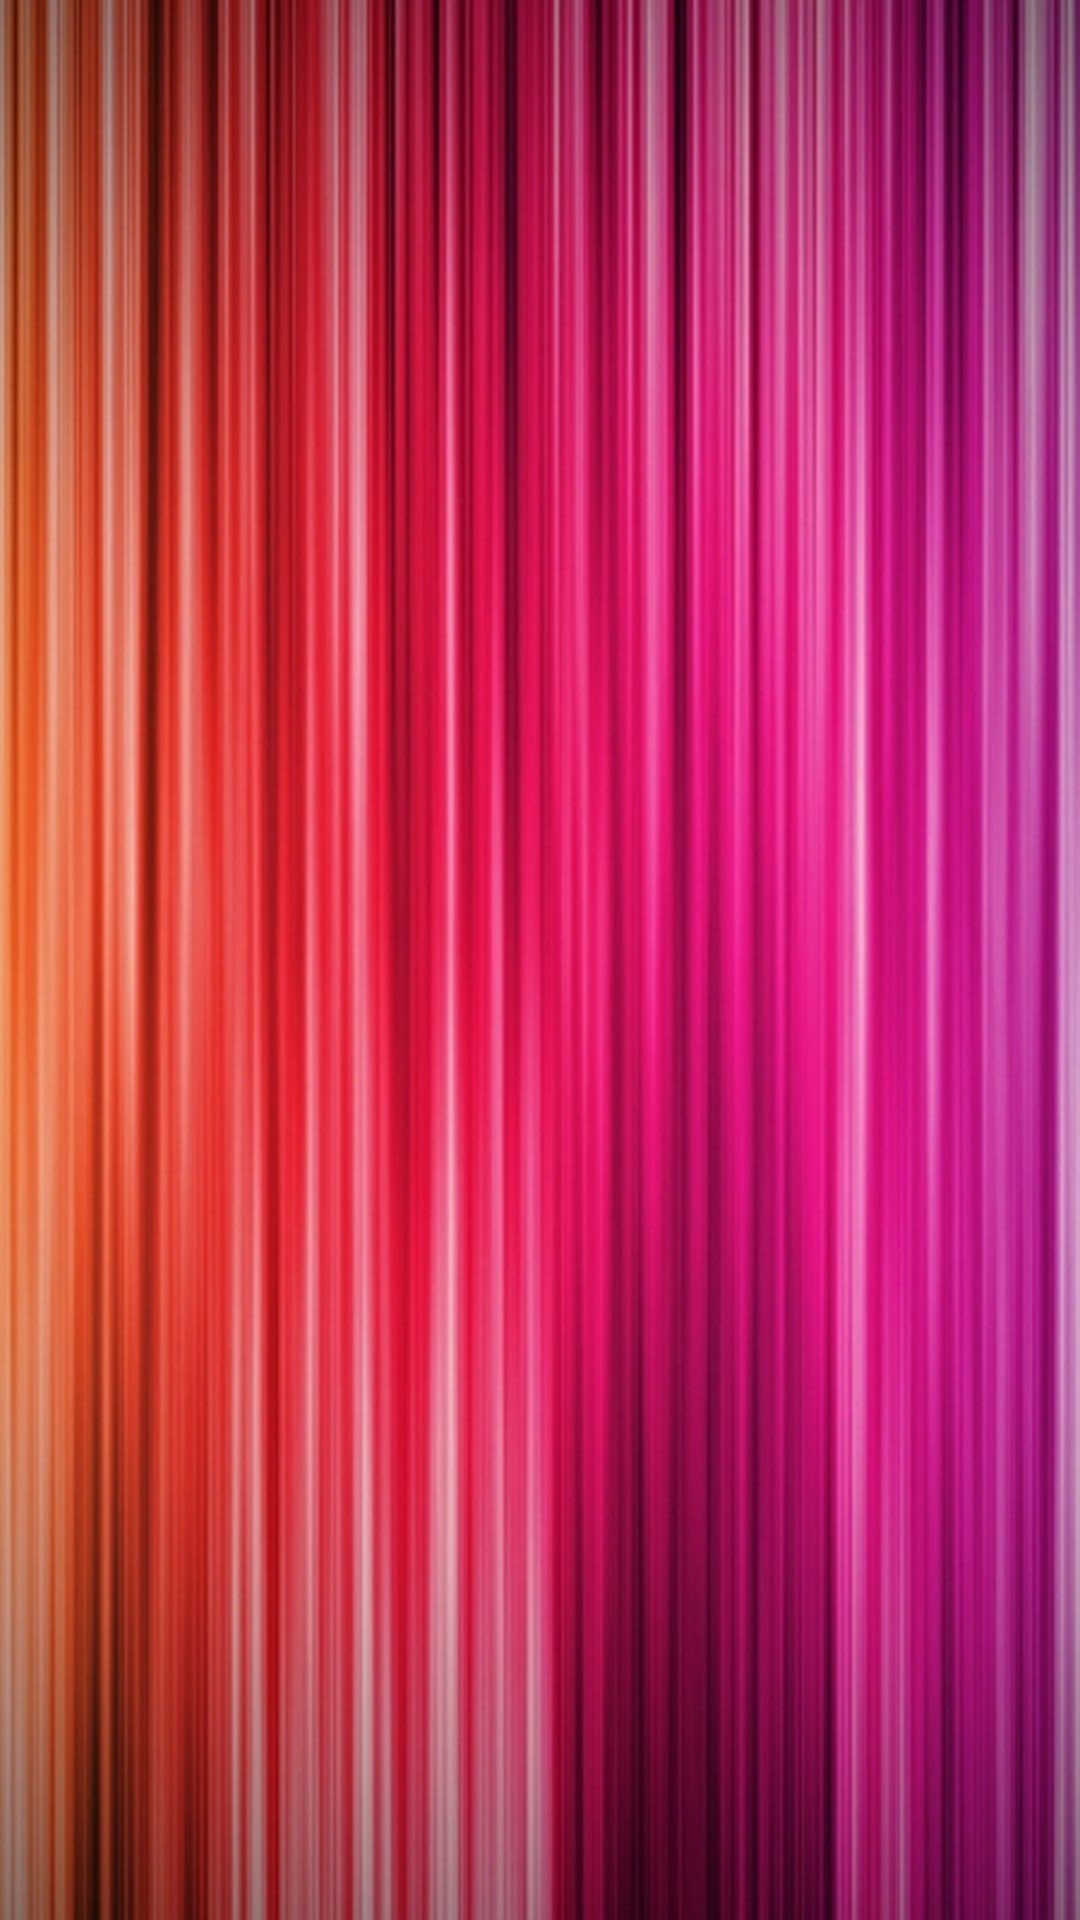 Rainbow Phone Wallpaper with high-resolution 1080x1920 pixel. Download all Mobile Wallpapers and Use them as wallpapers for your iPhone, Tablet, iPad, Android and other mobile devices